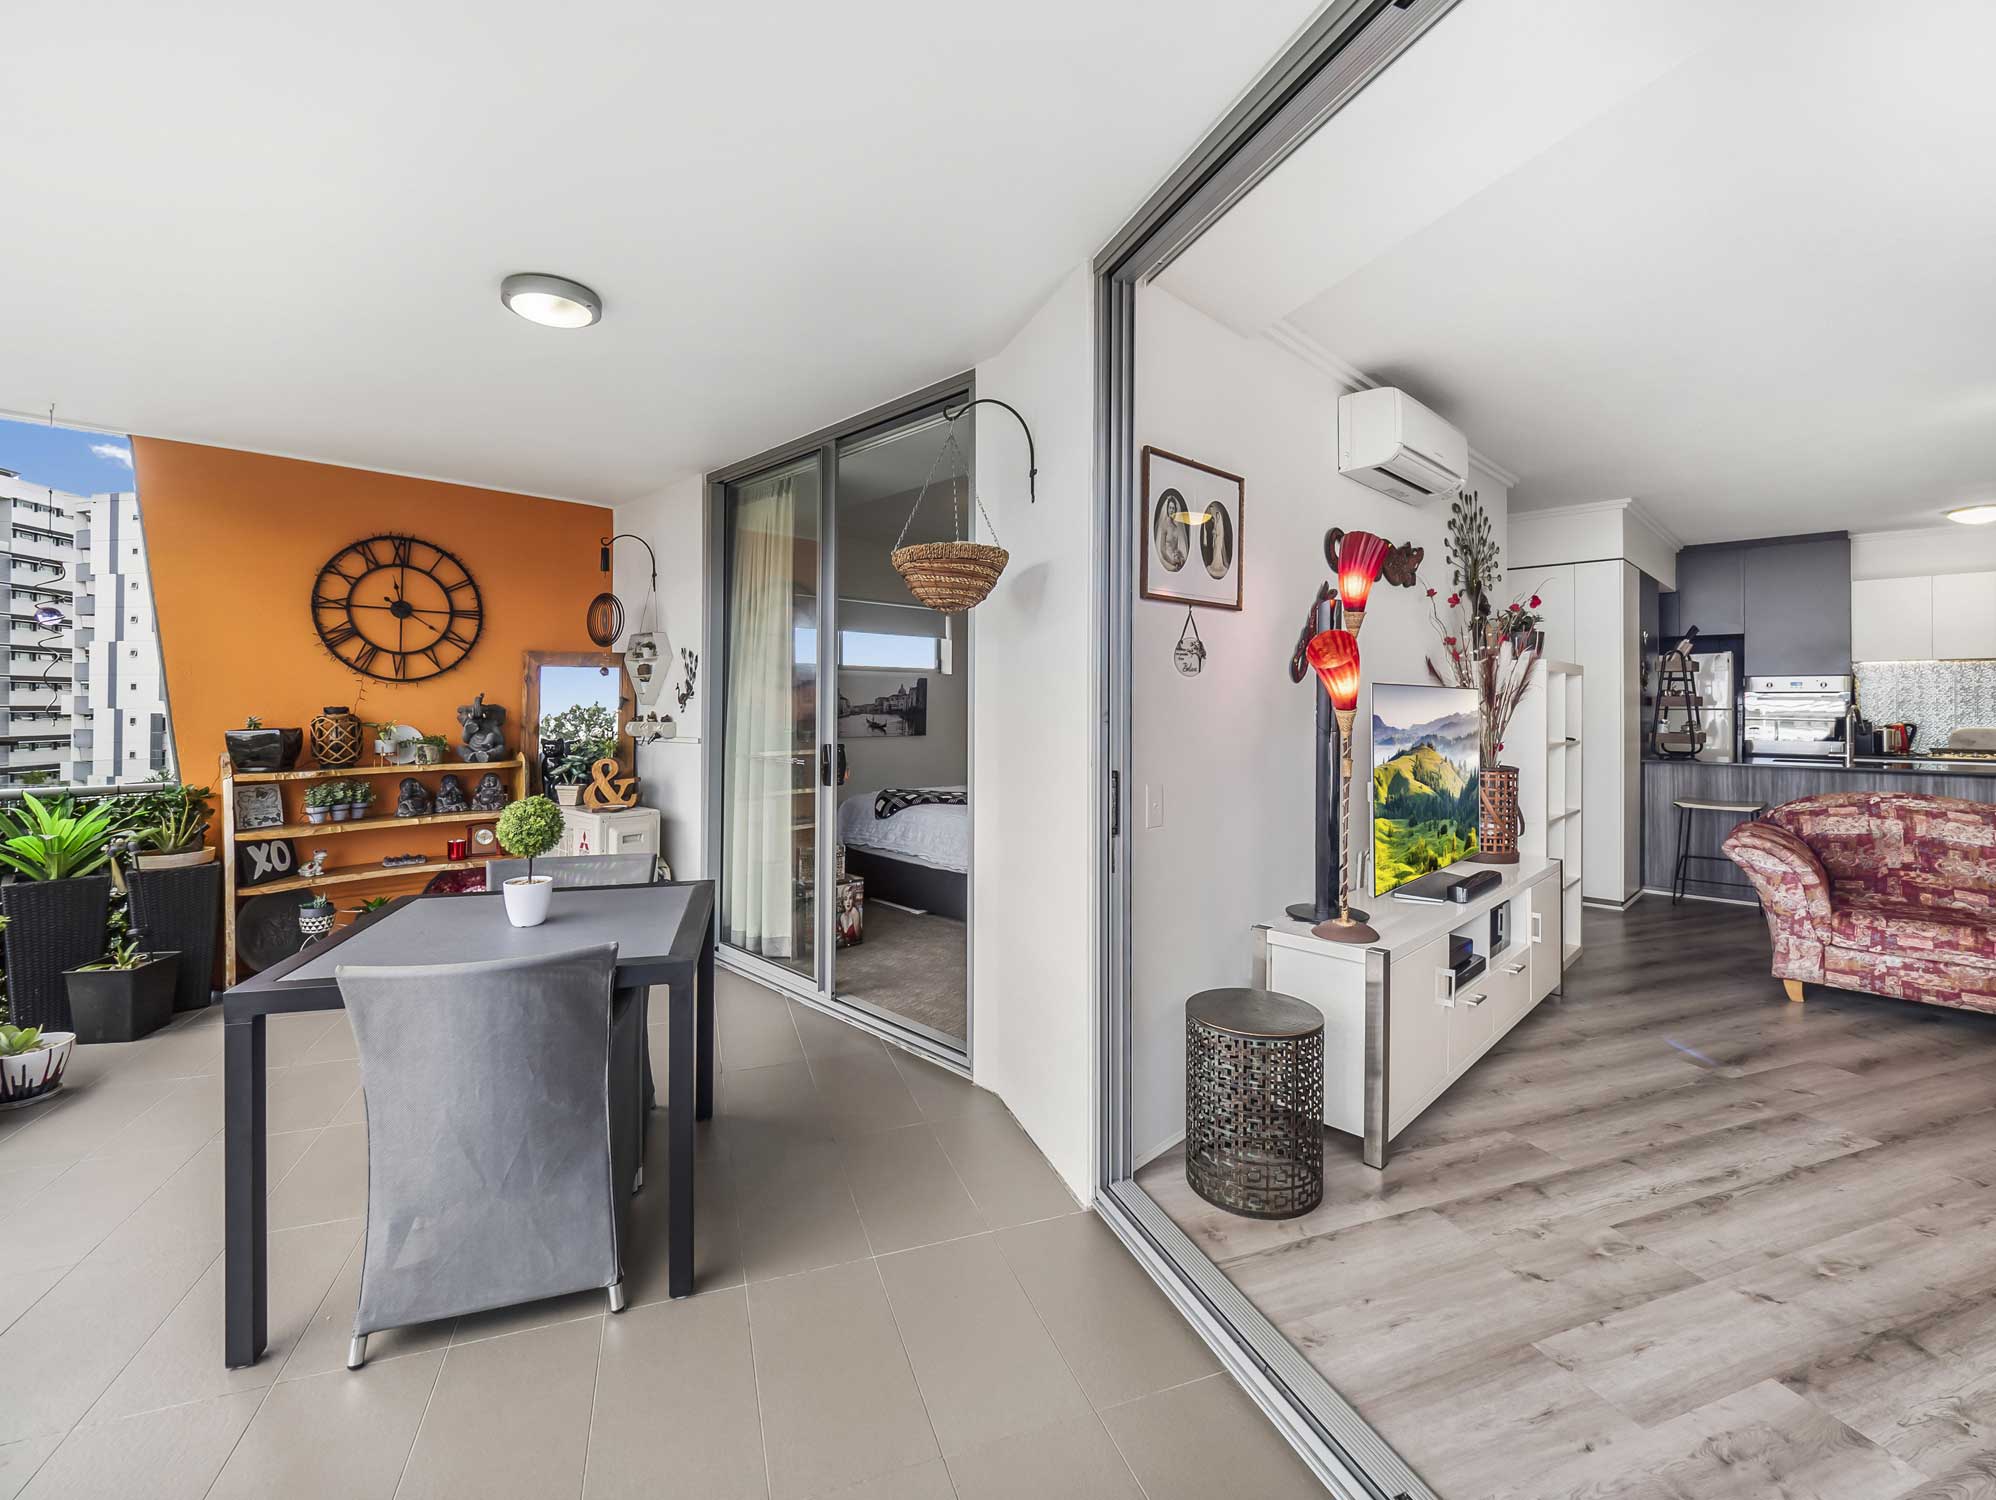 Real estate photography of Kangaroo Point apartment for sale - the balcony